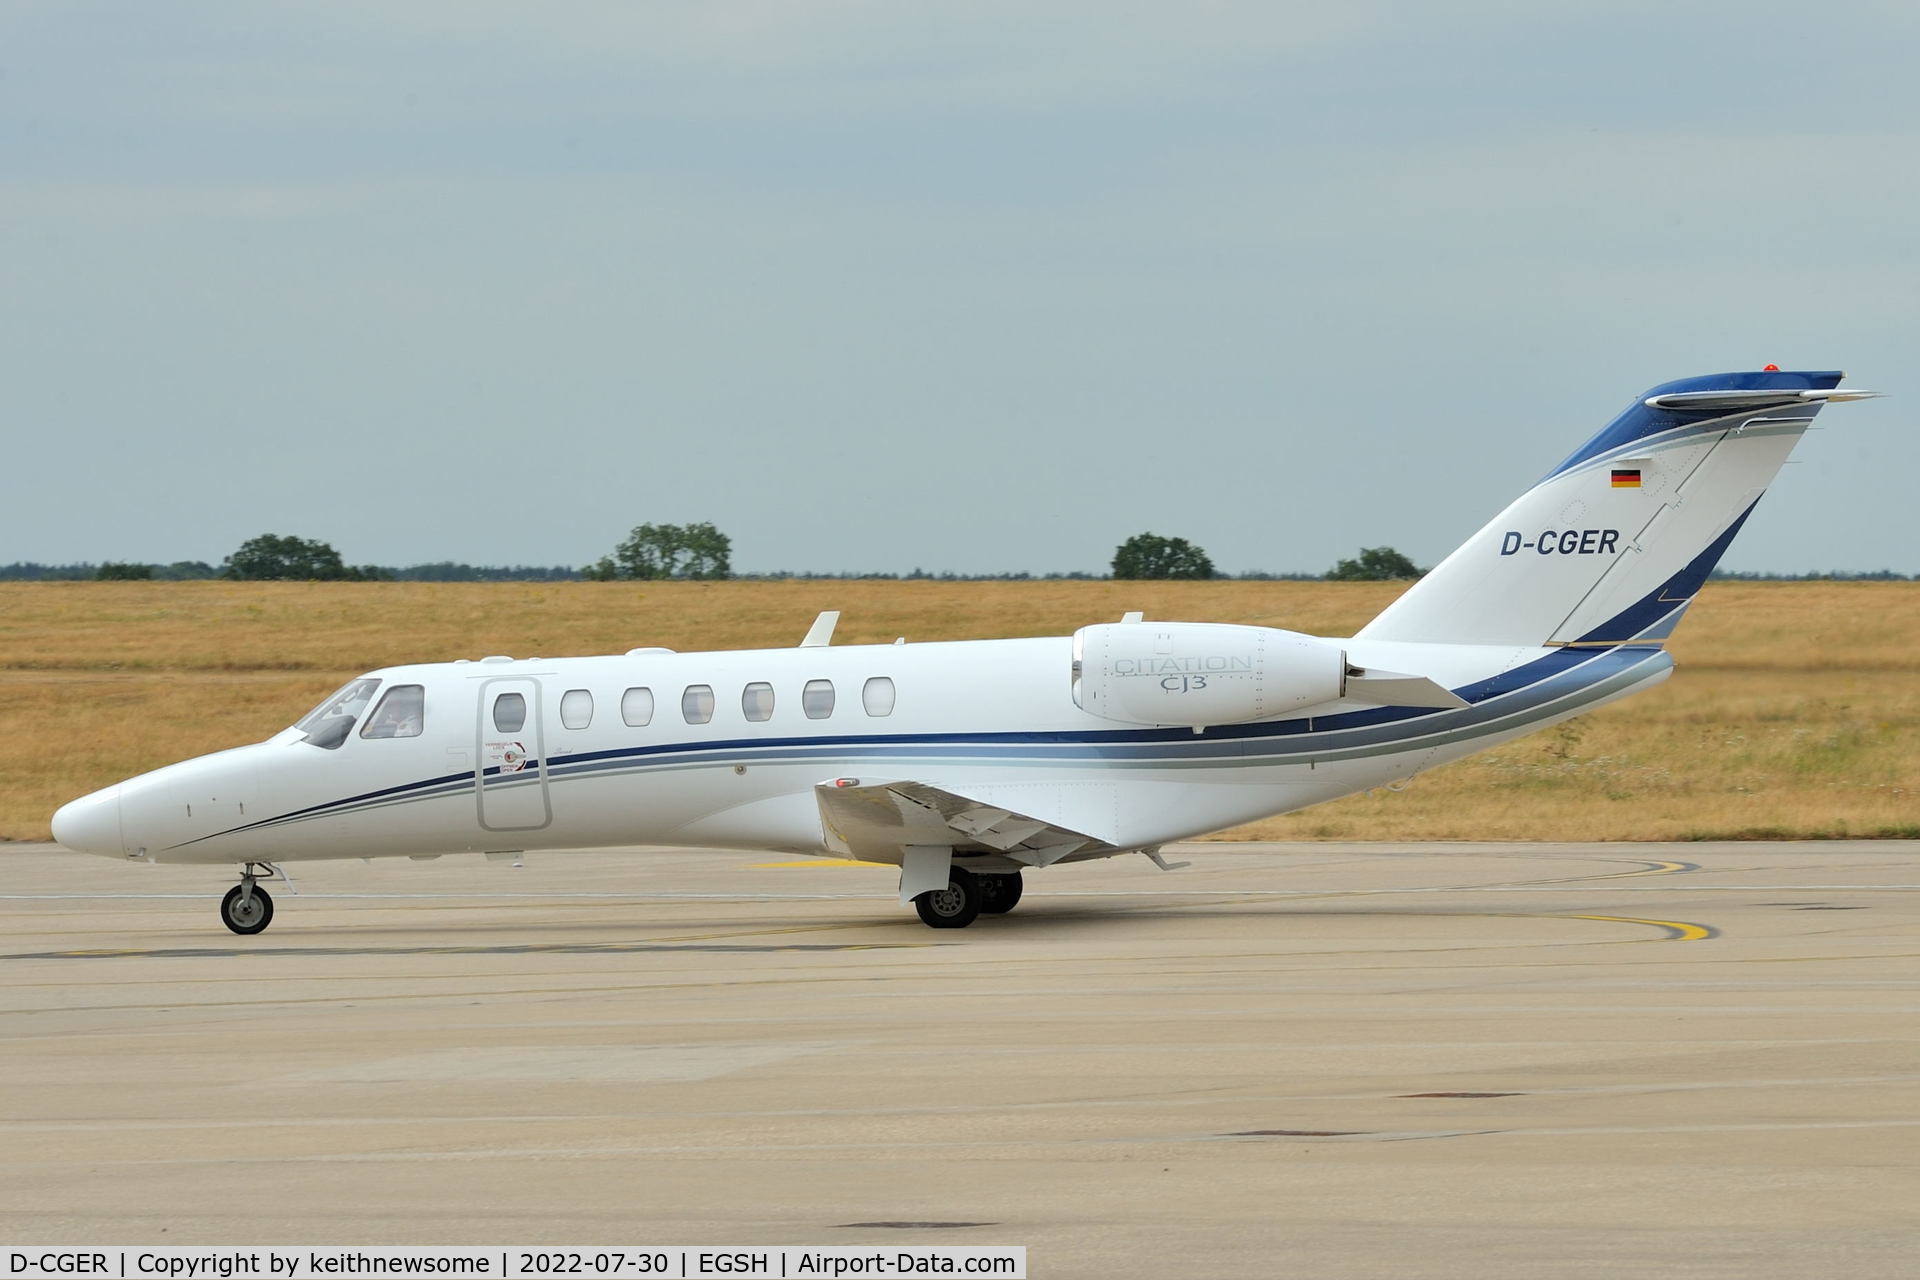 D-CGER, 2006 Cessna 525B CitationJet CJ3 C/N 525B-0081, Arriving at Norwich from Cannes, France.